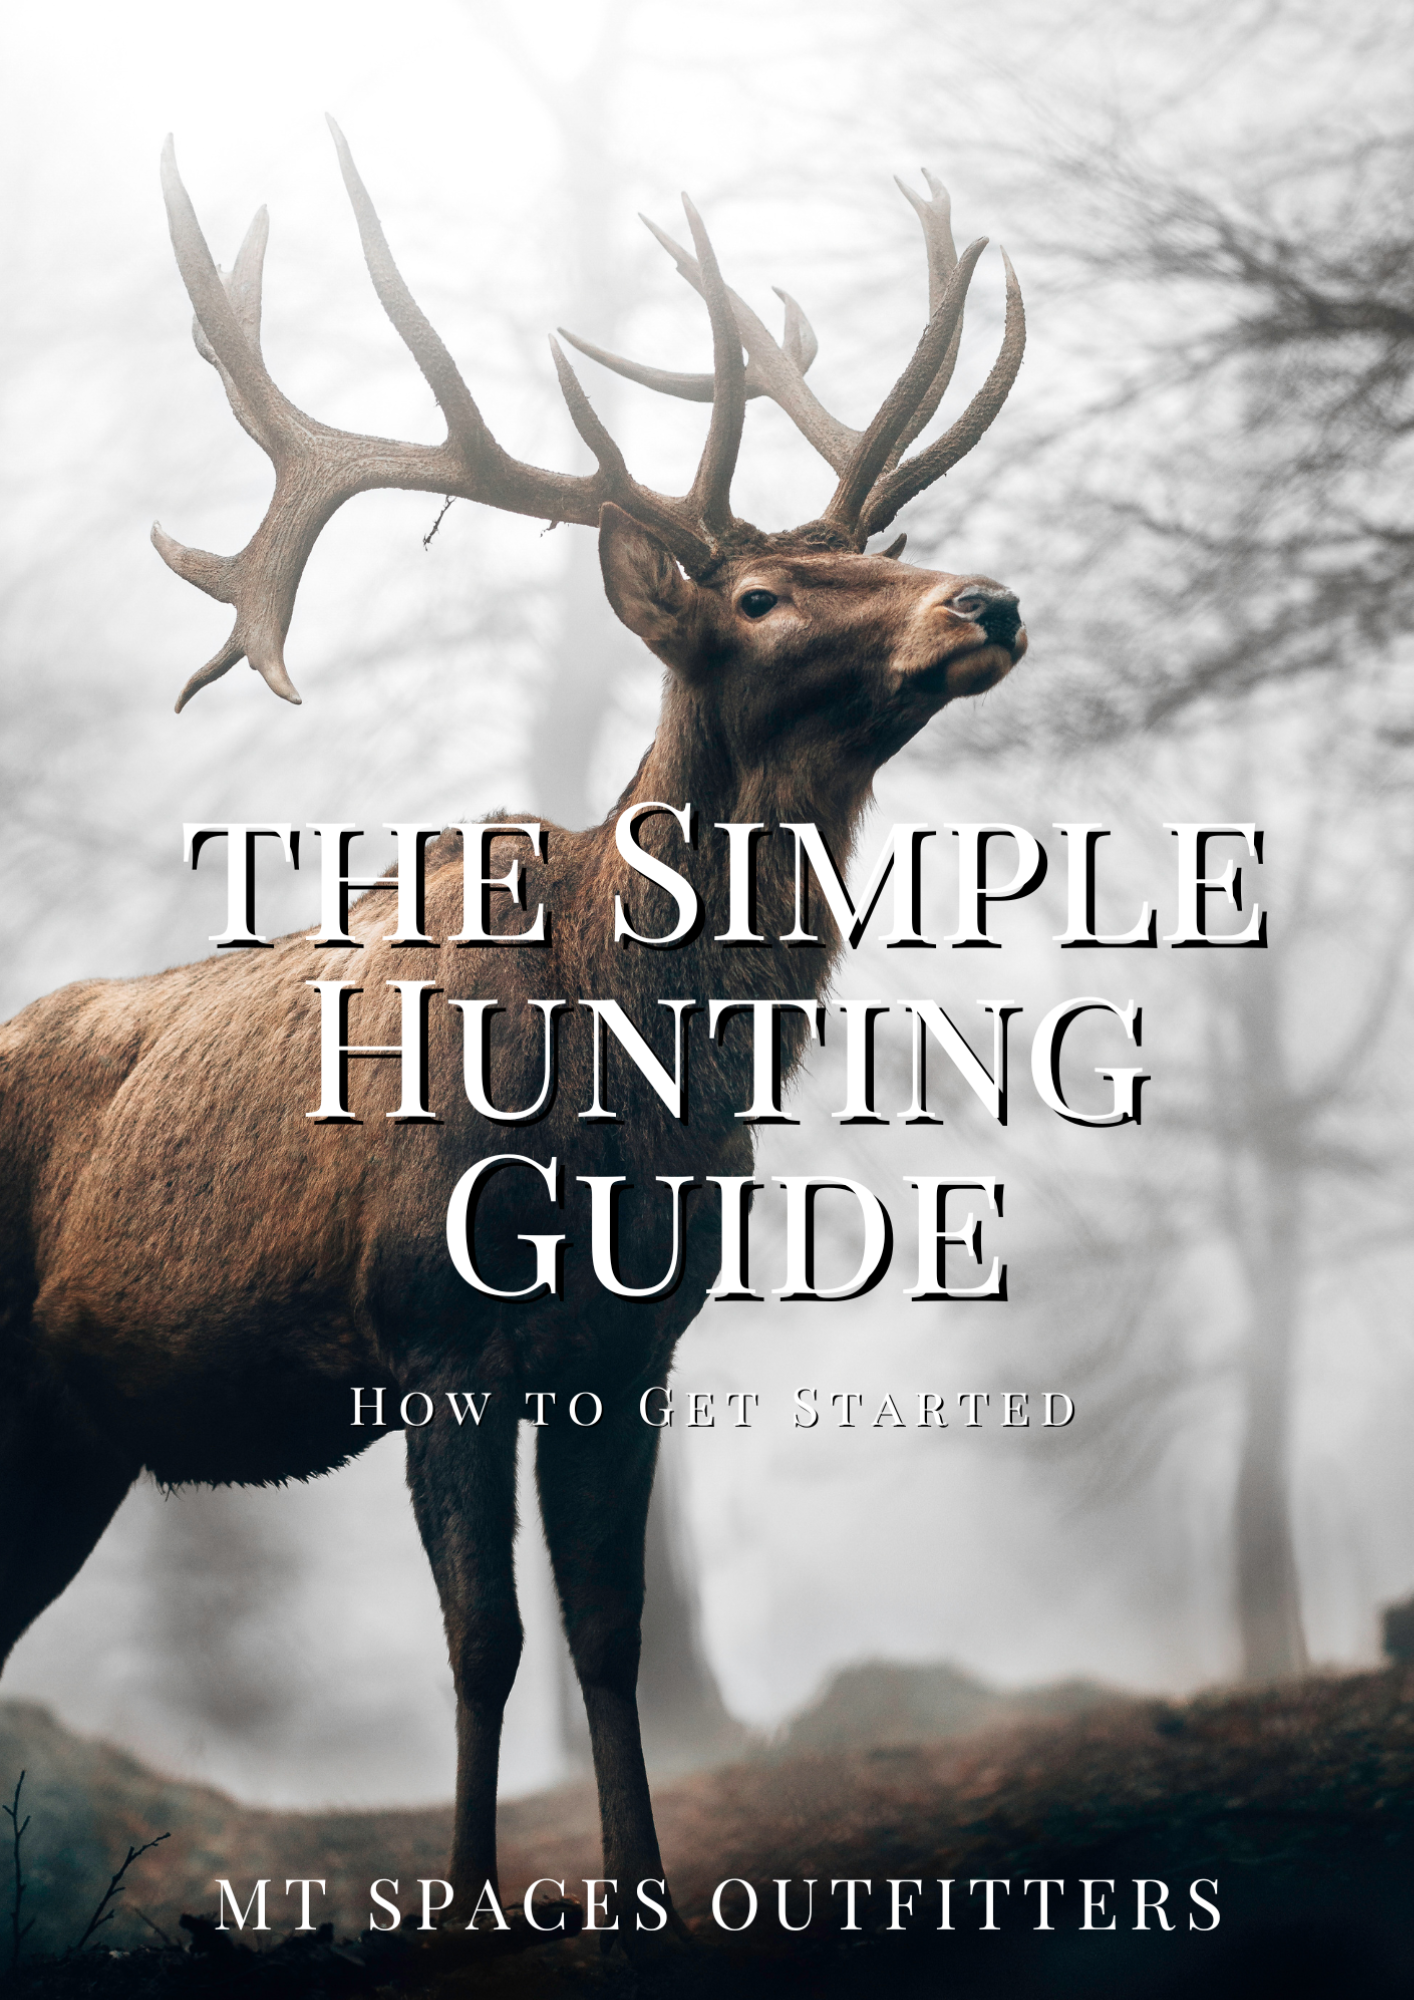 The Simple Hunting Guide: How to Get Started - MT Spaces Outfitters